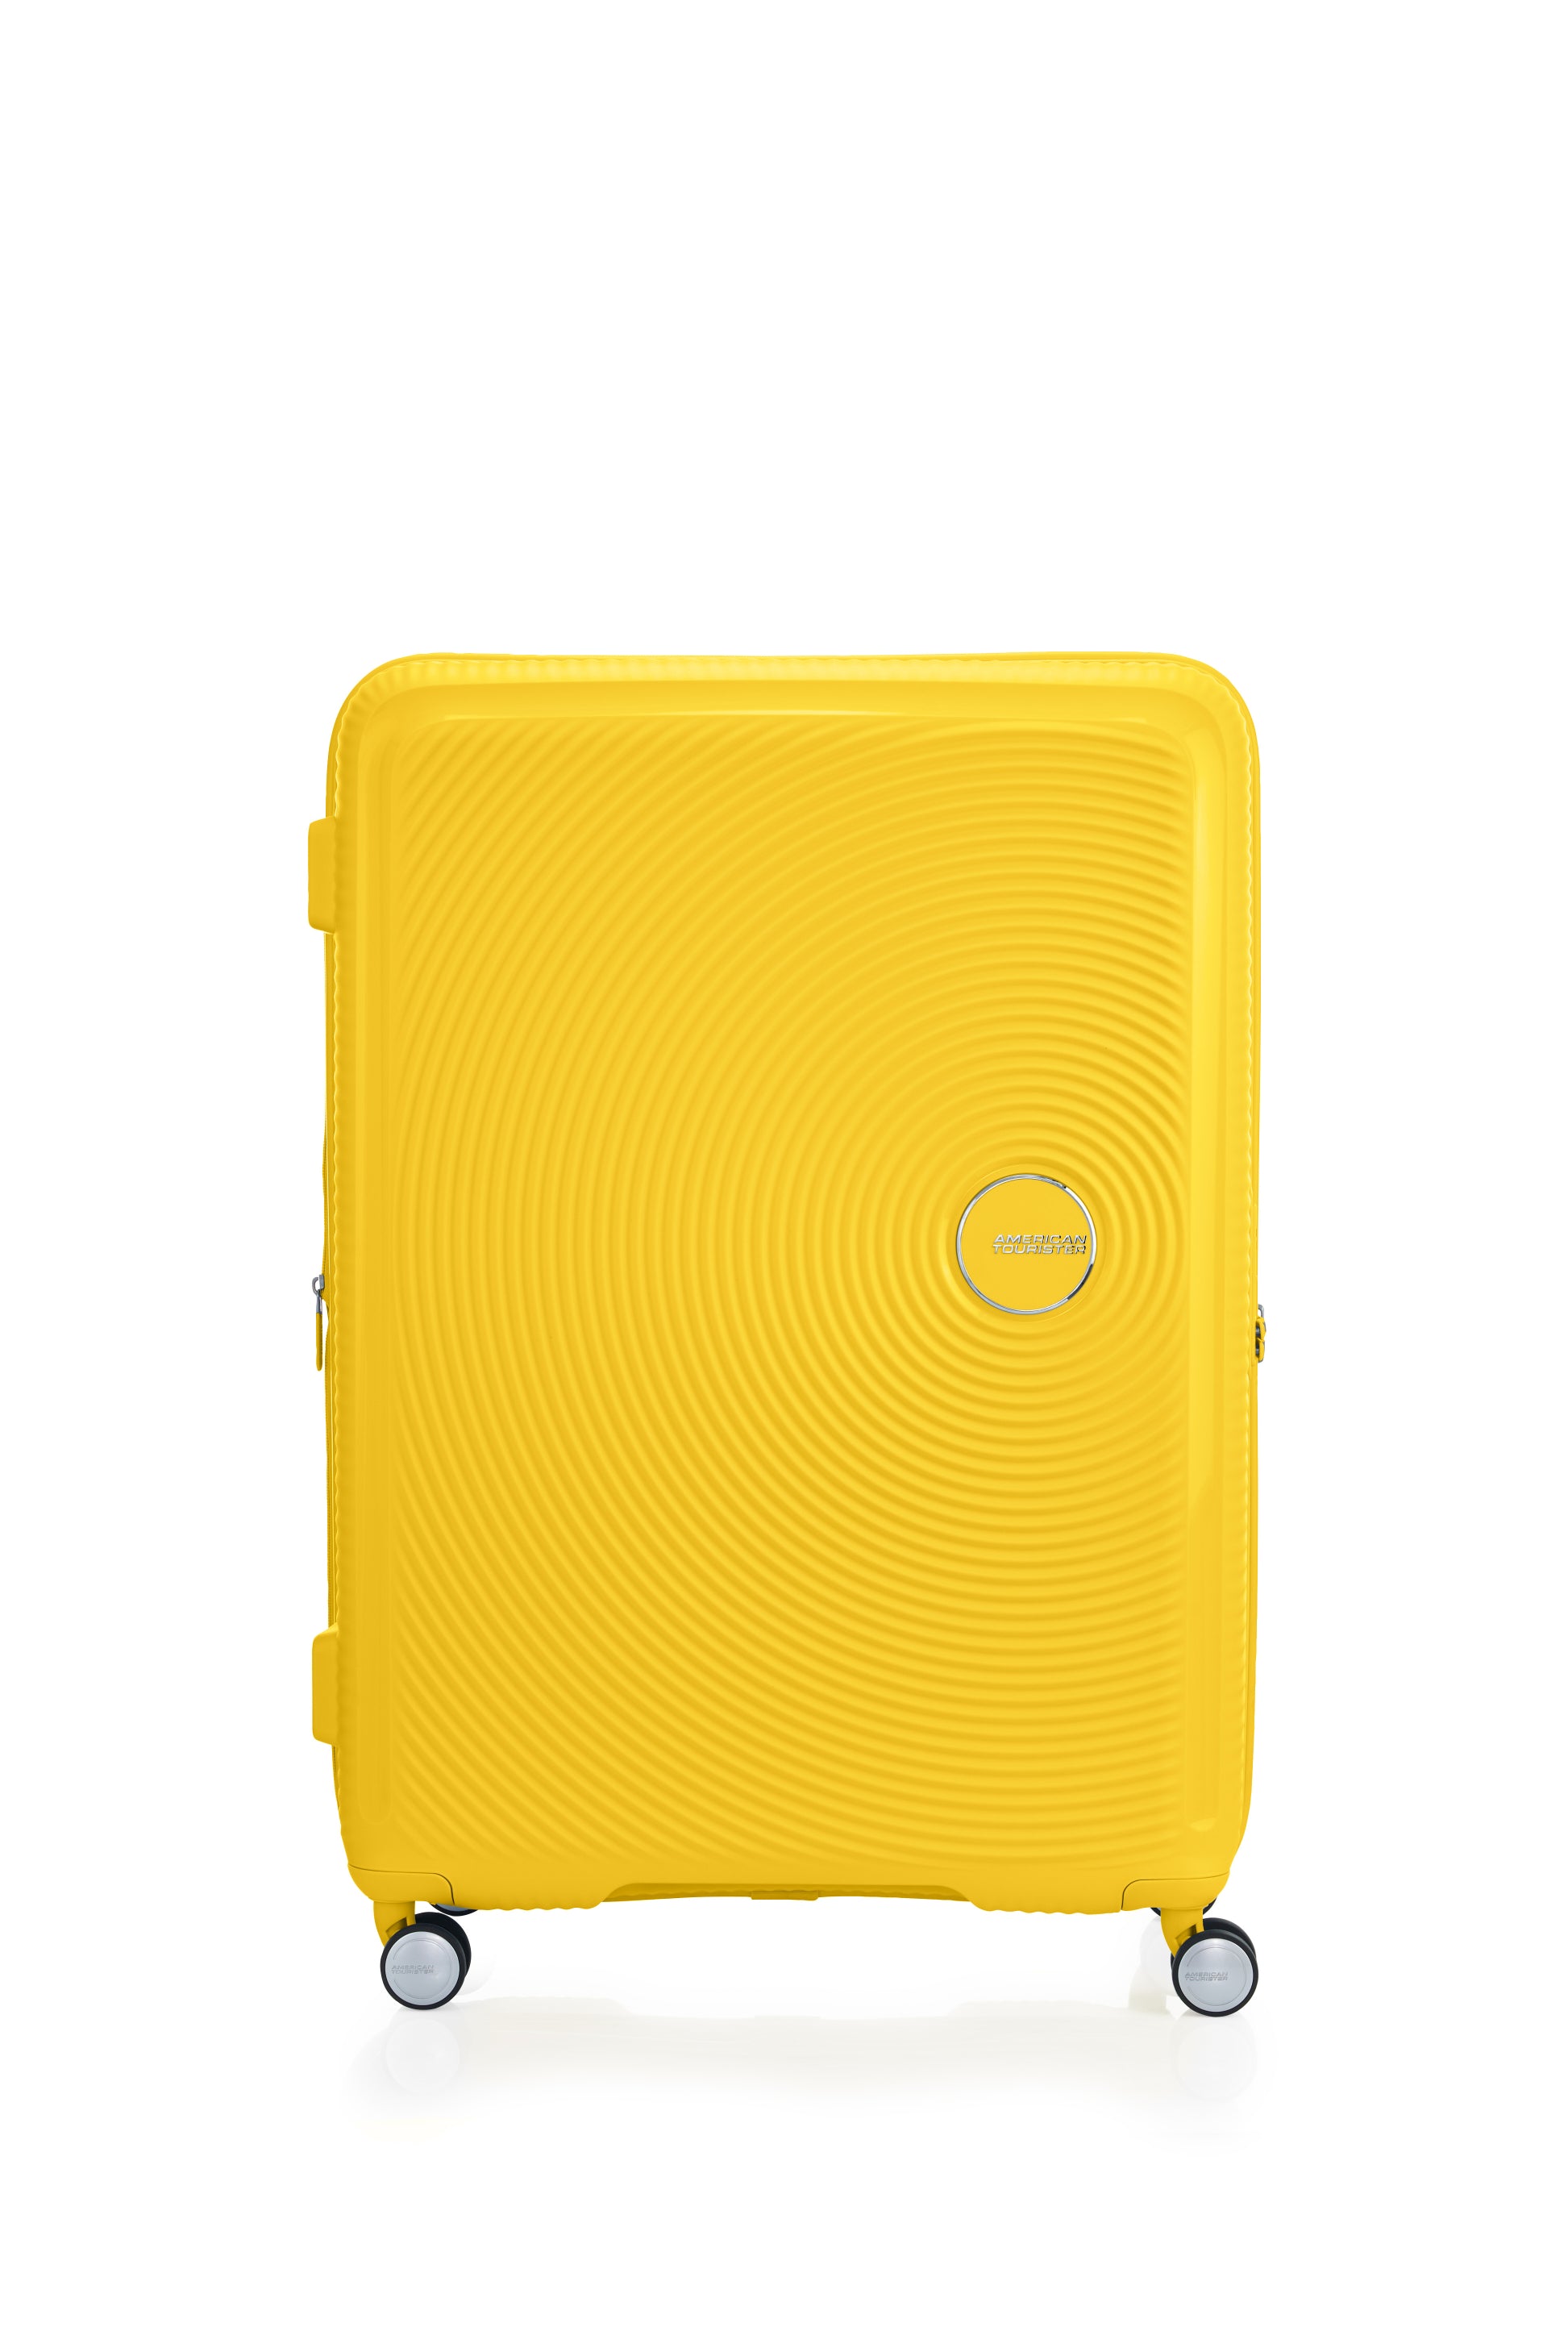 American Tourister - Curio 2.0 80cm Large Suitcase - Golden Yellow-3